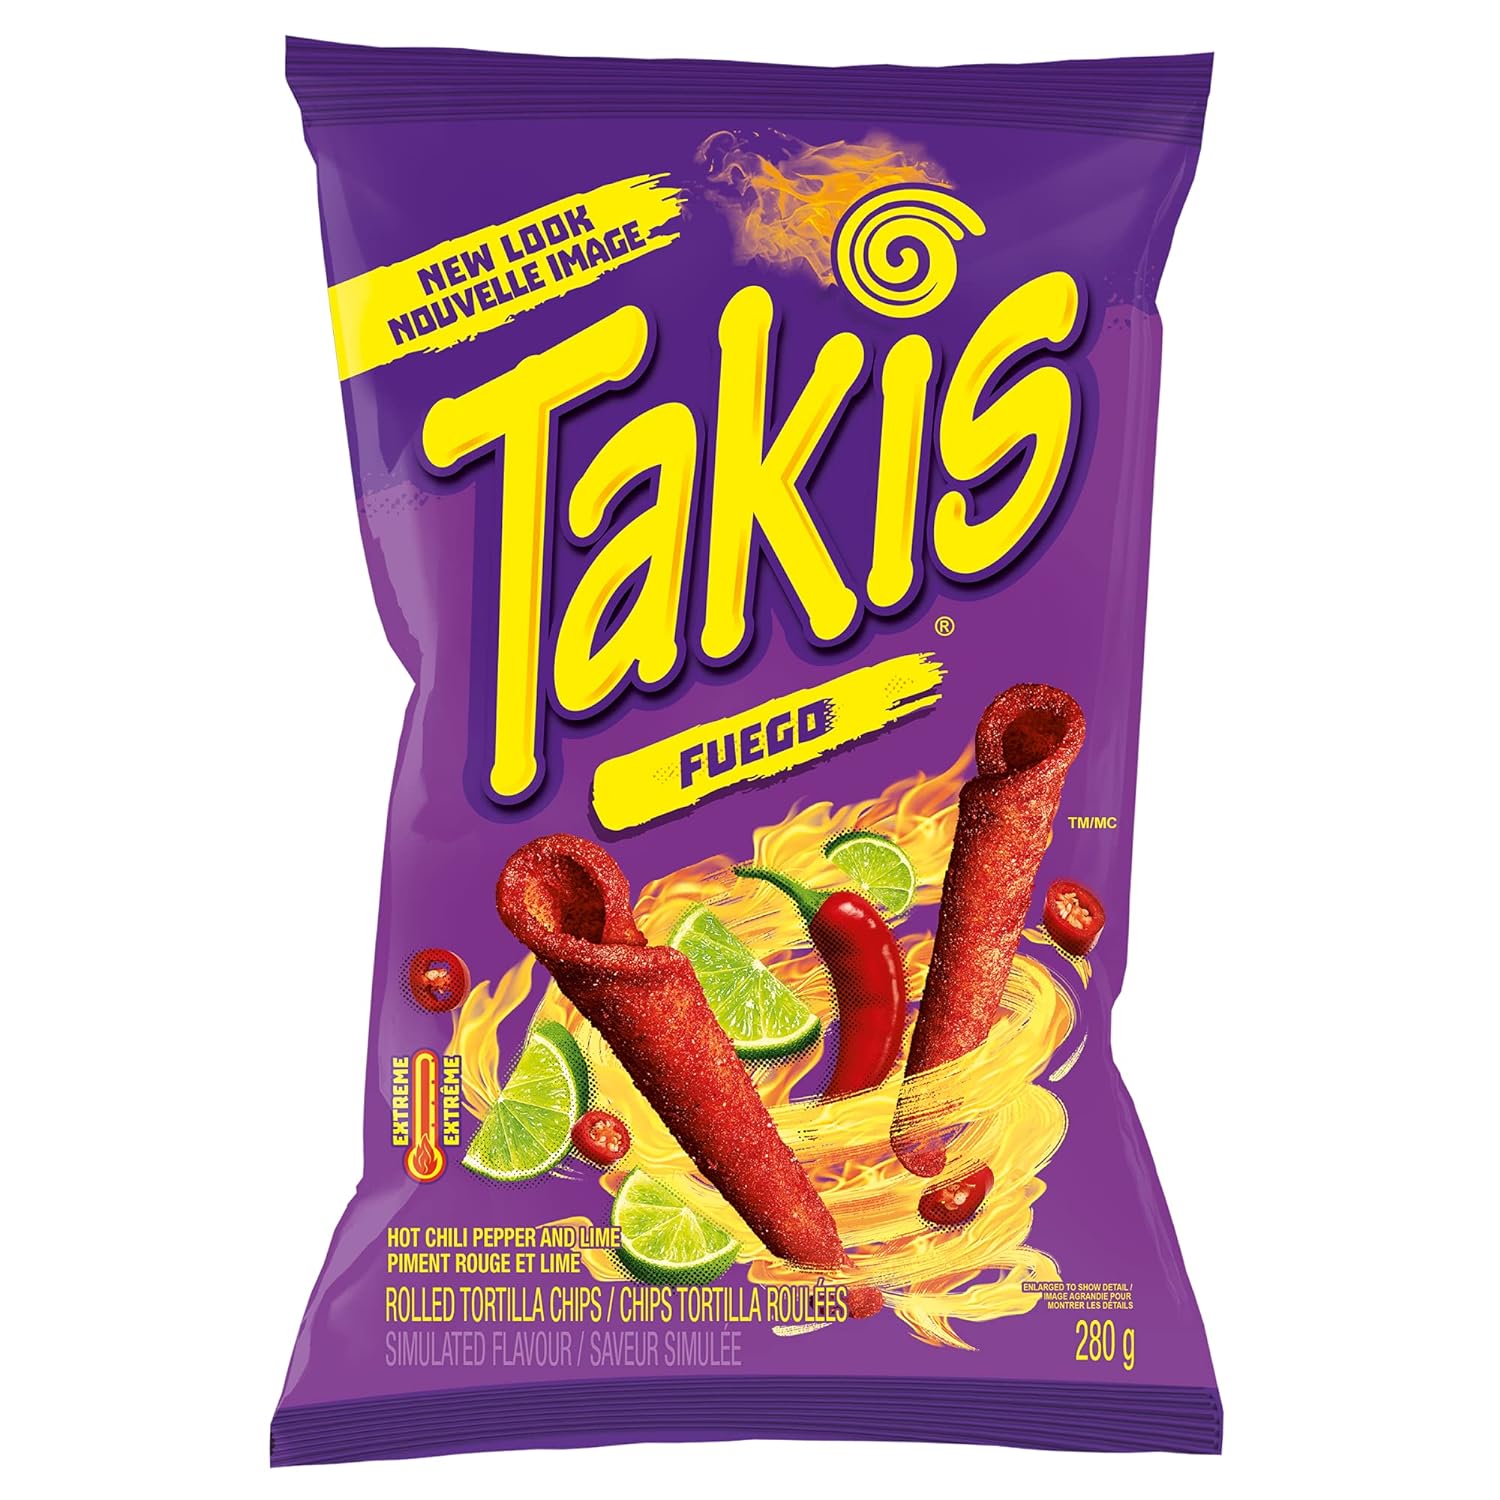 10-takis-chips-nutrition-facts